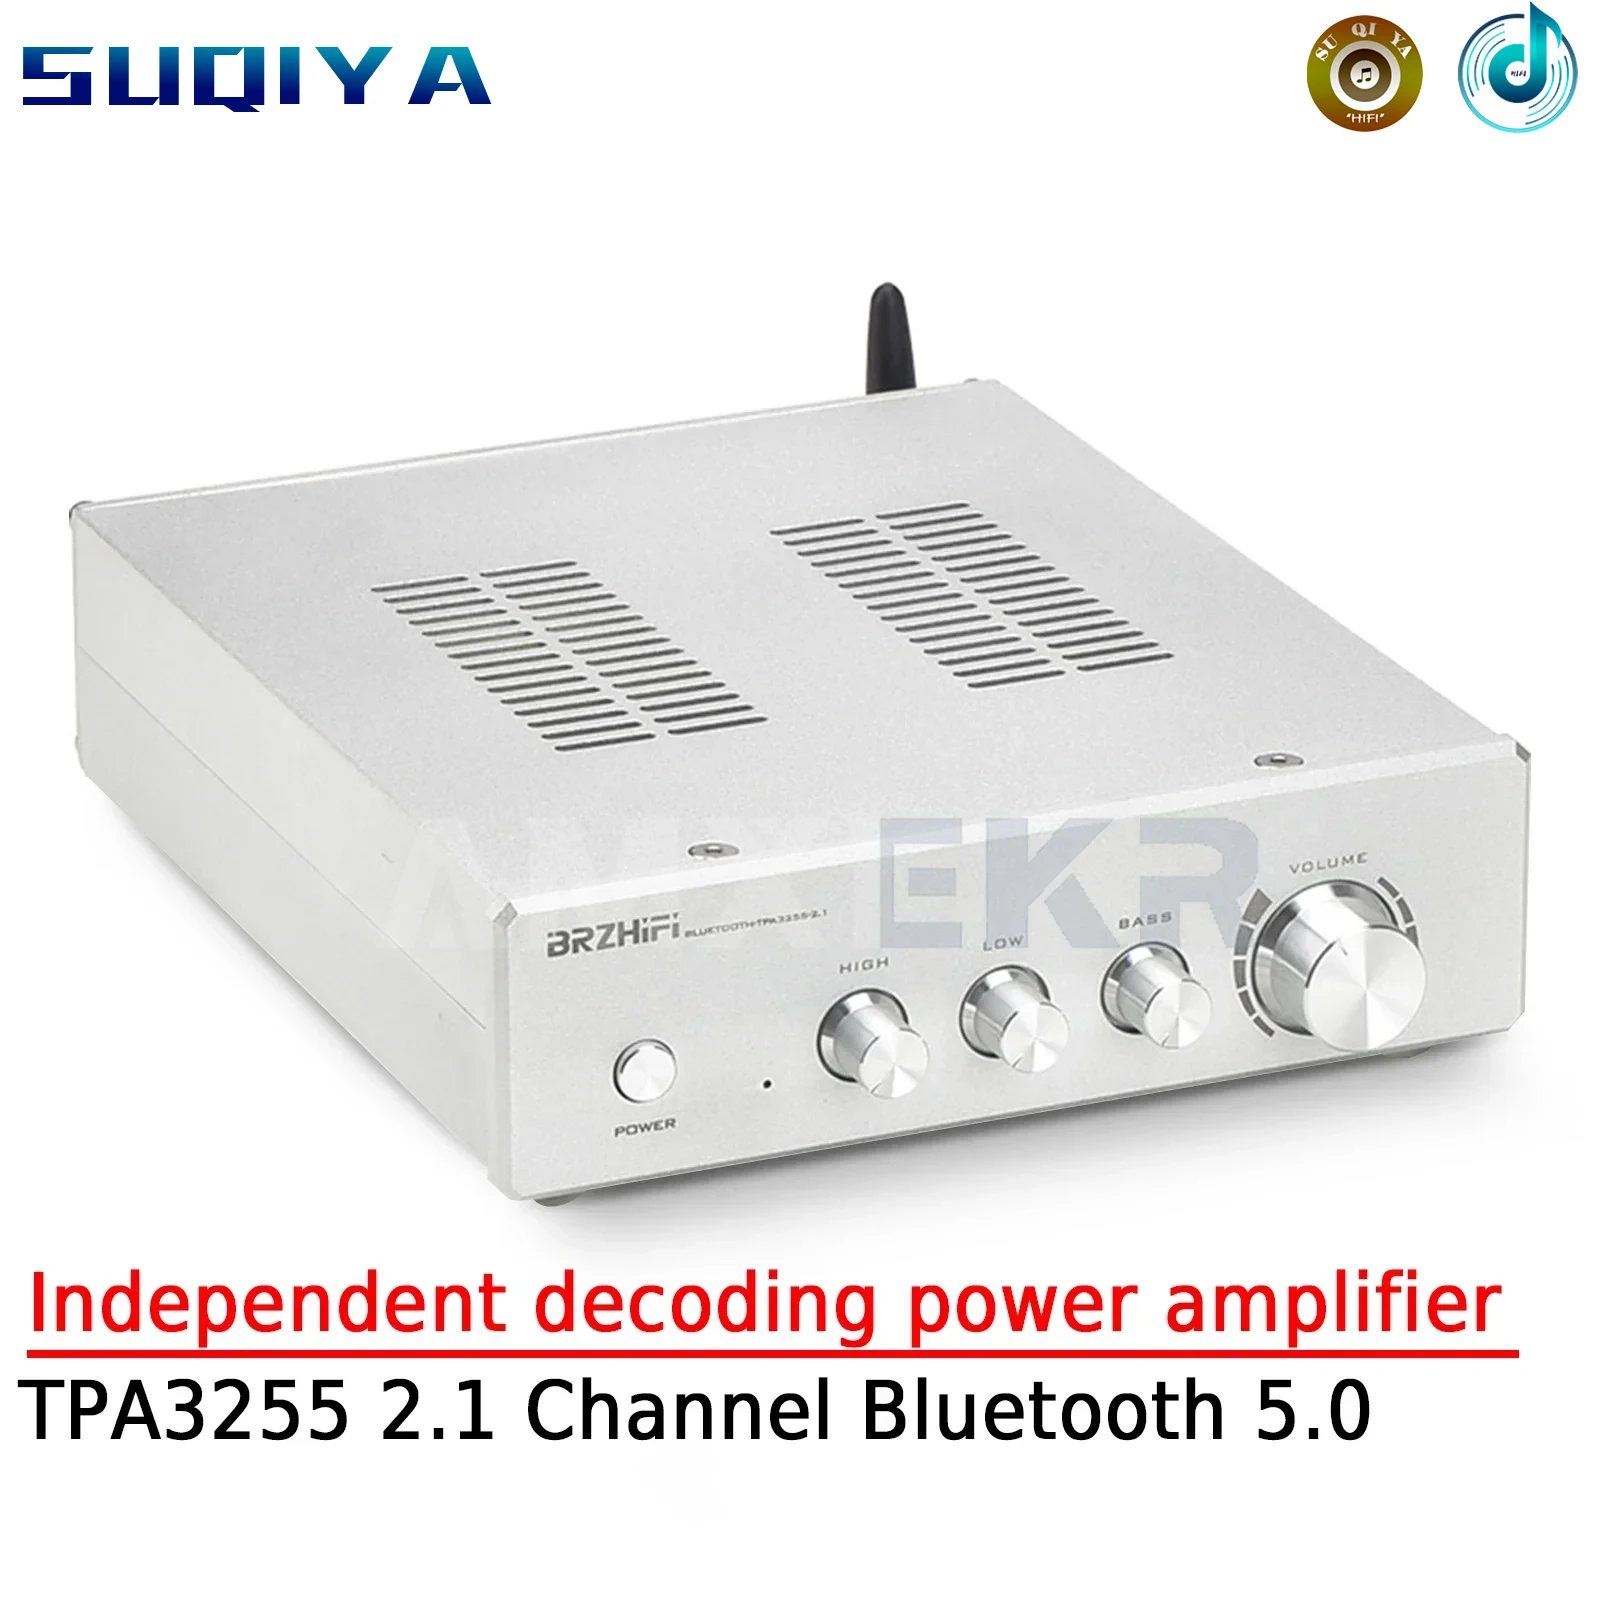 

AMXEKR Dual Core TPA3255 Power Amplifier 2.1 Channel Bluetooth 5.0 Independent Decoding Fever Level High Power